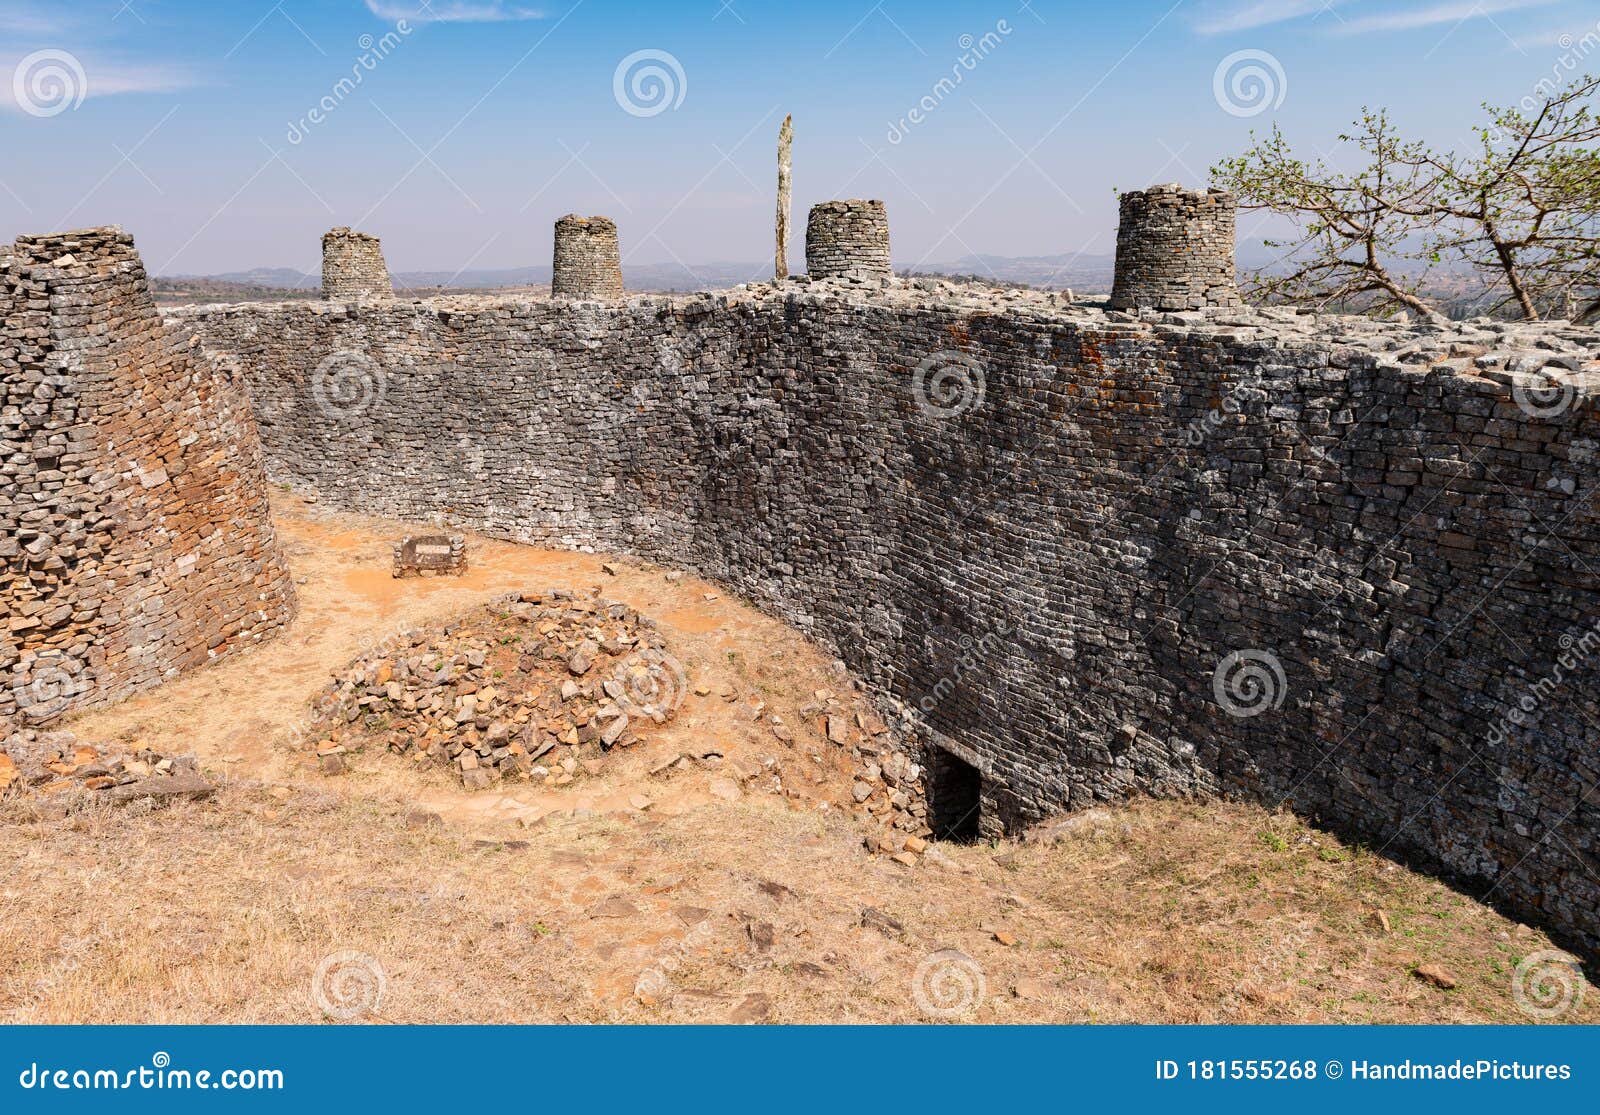 ancient ruins of great zimbabwe southern africa